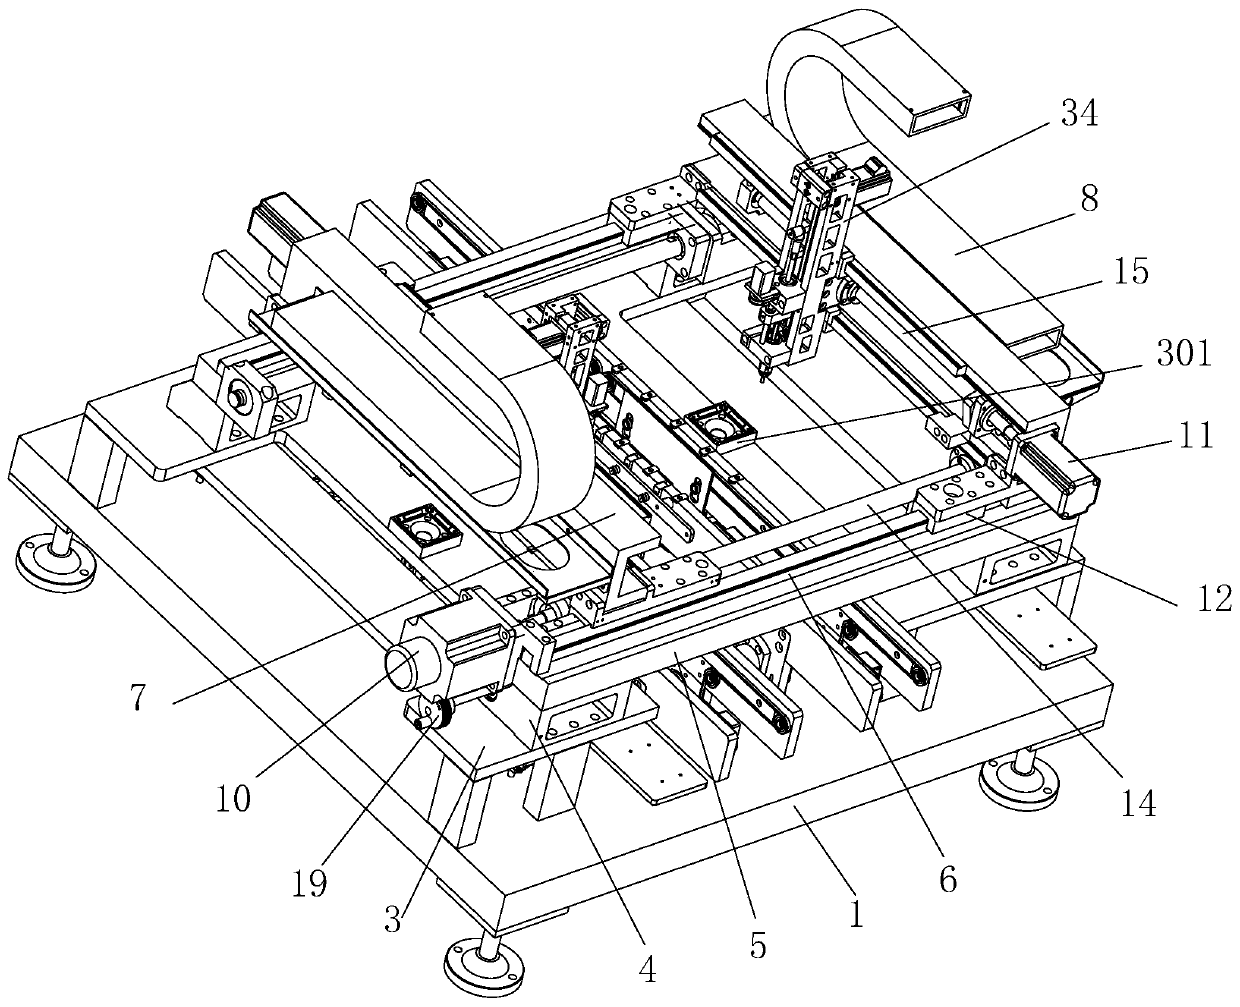 Multi-size chip mounting device